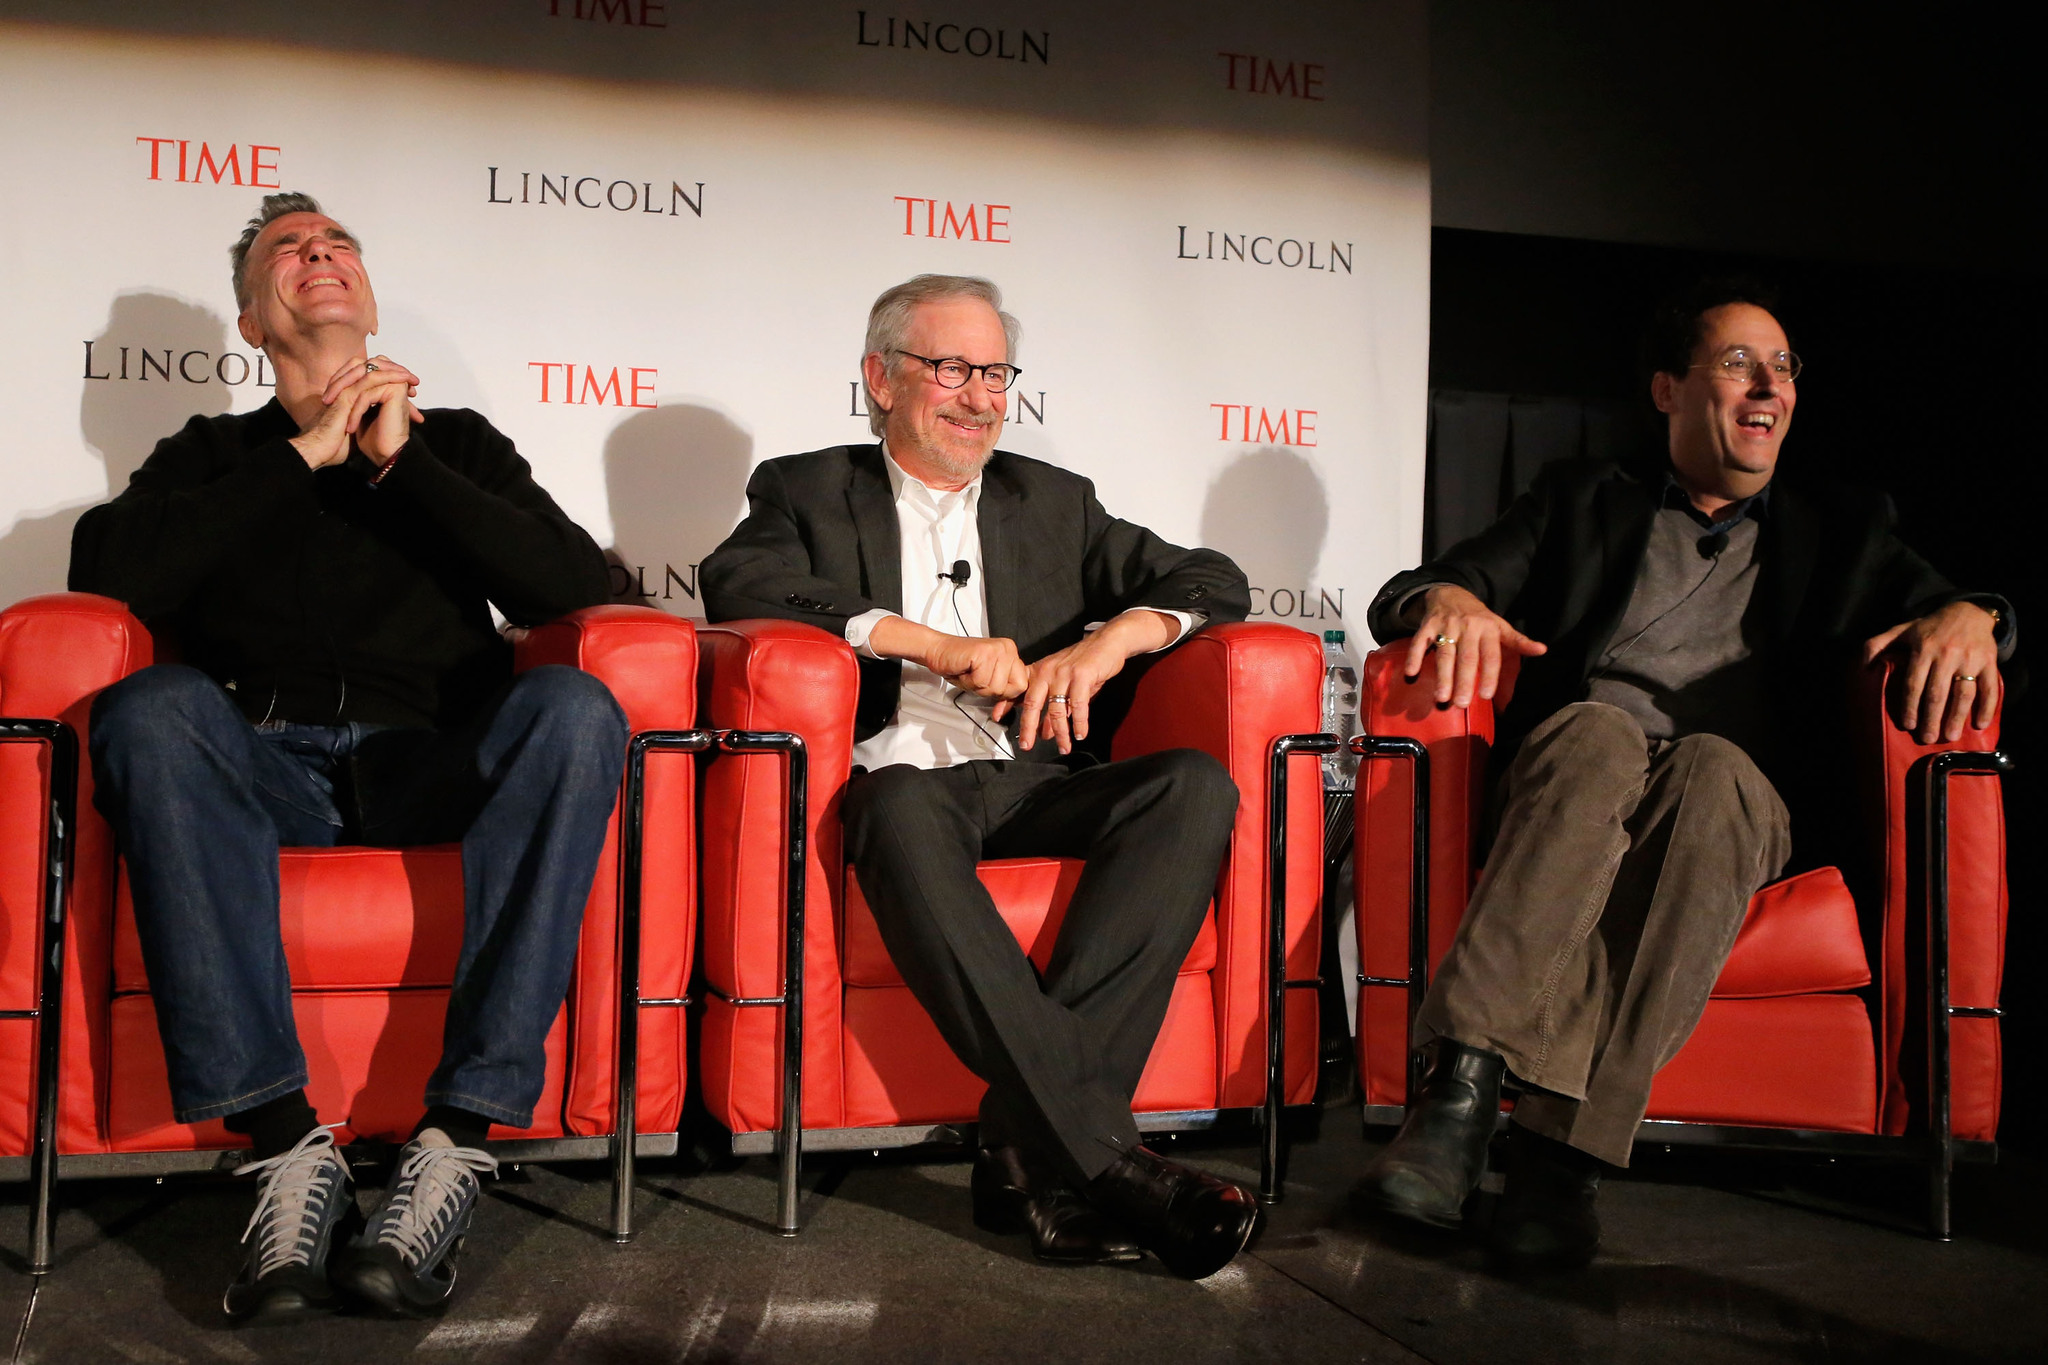 Steven Spielberg, Daniel Day-Lewis and Tony Kushner at event of Linkolnas (2012)